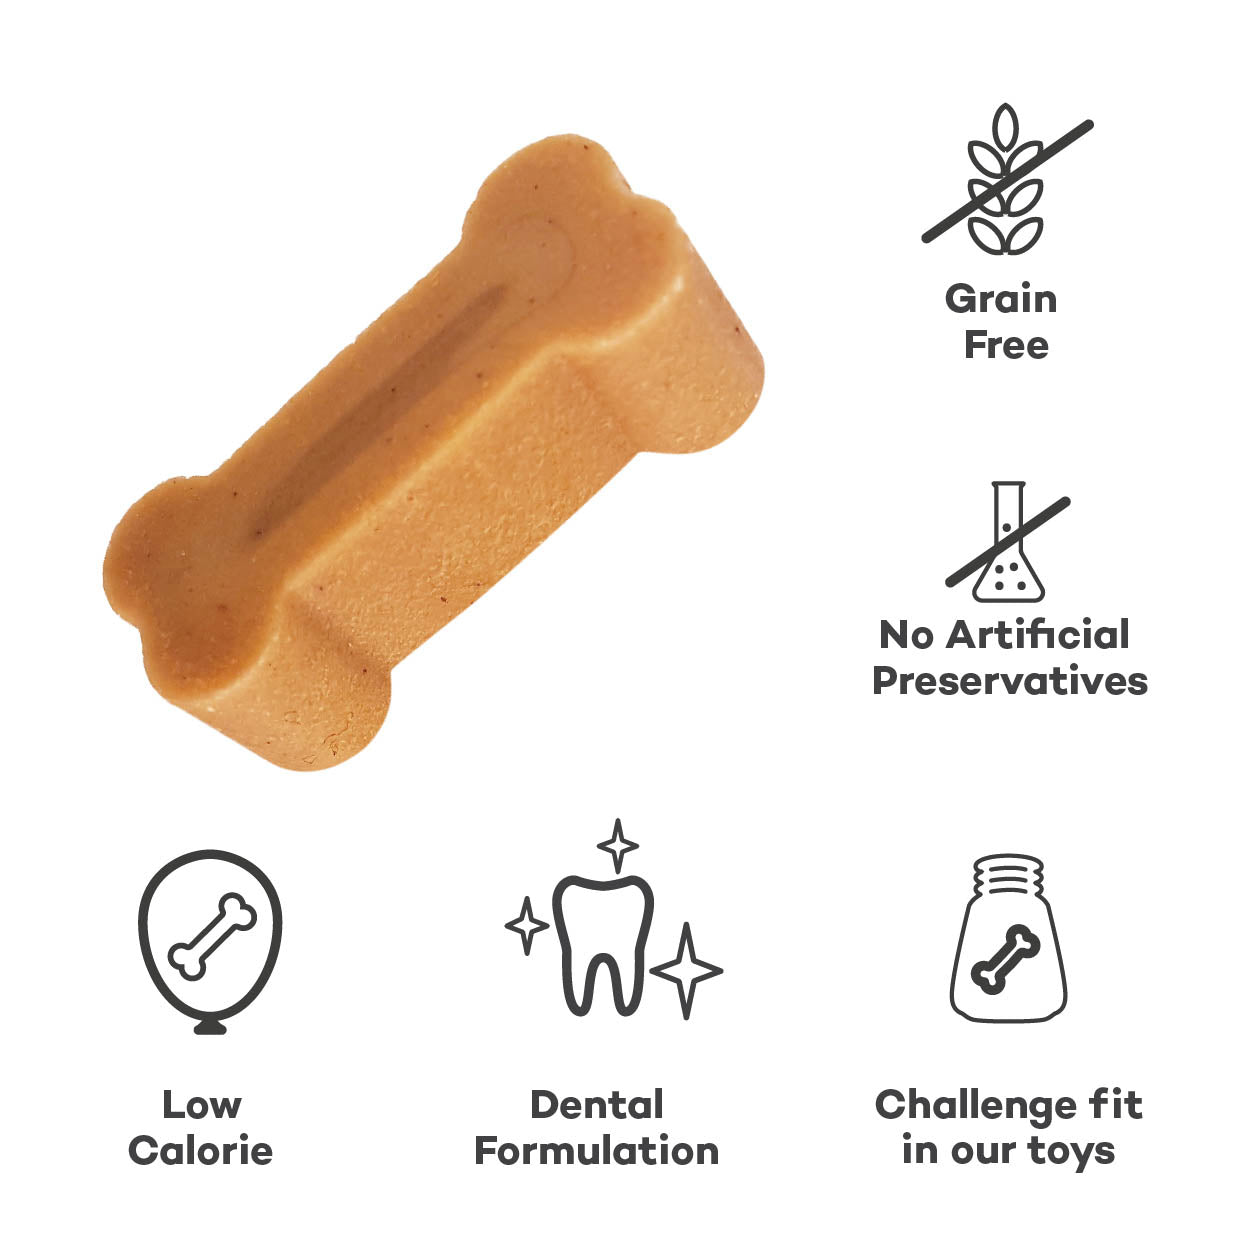 Puzzle Treats - Chicken & Carrot –